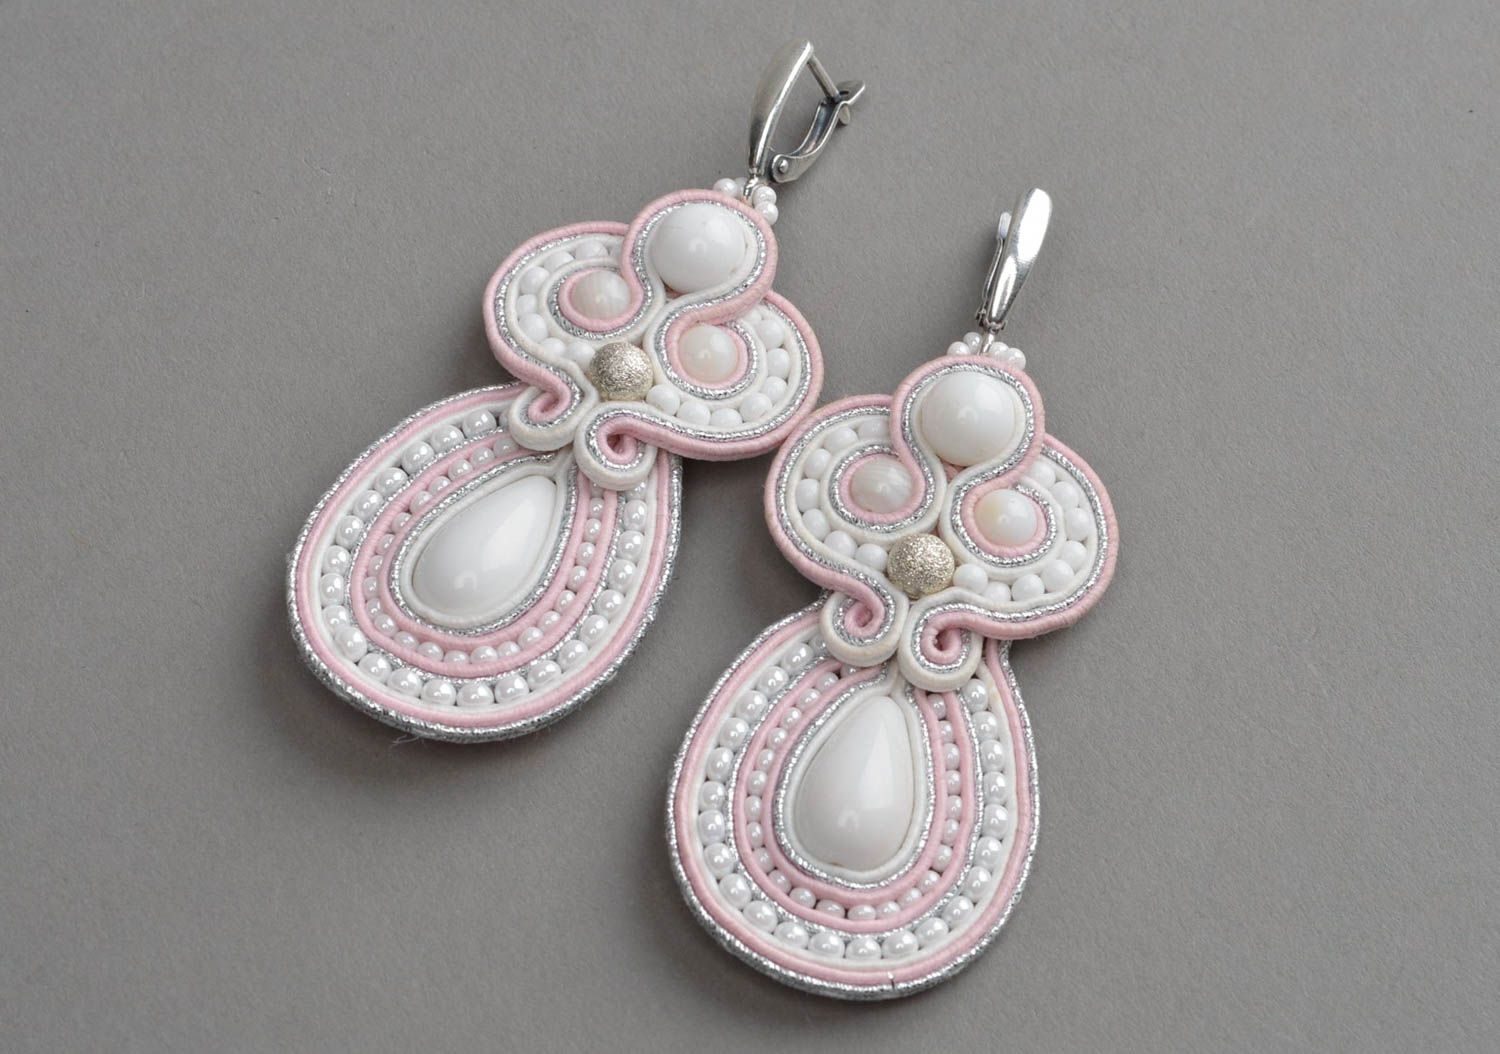 Designer handmade soutache earrings earrings with charms evening accessory photo 2